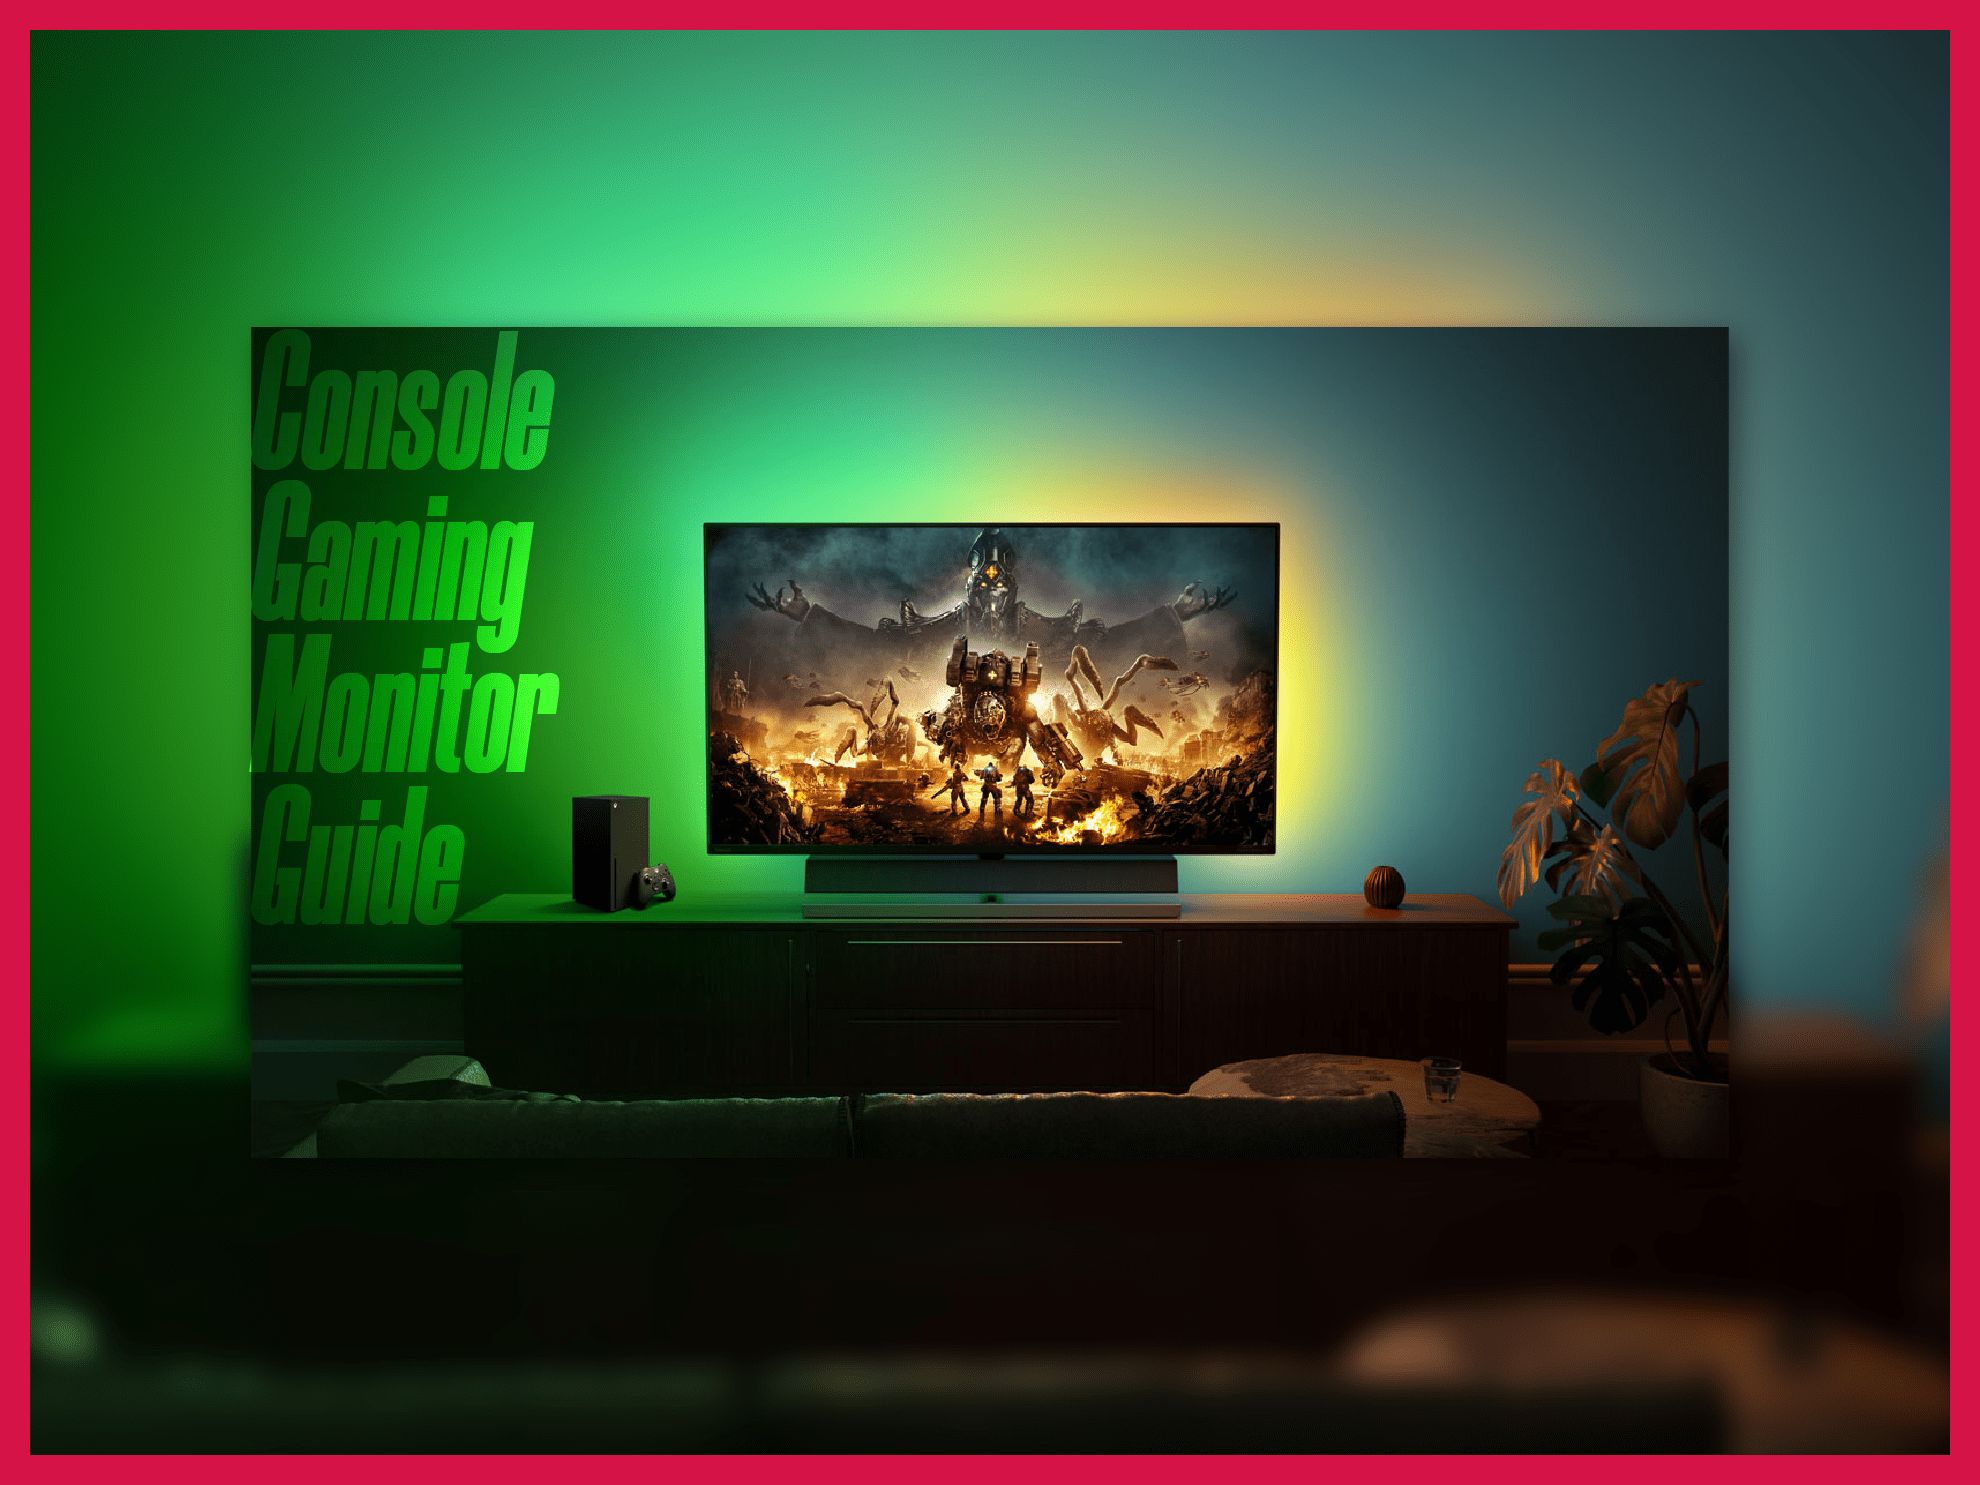 console gaming monitor guide